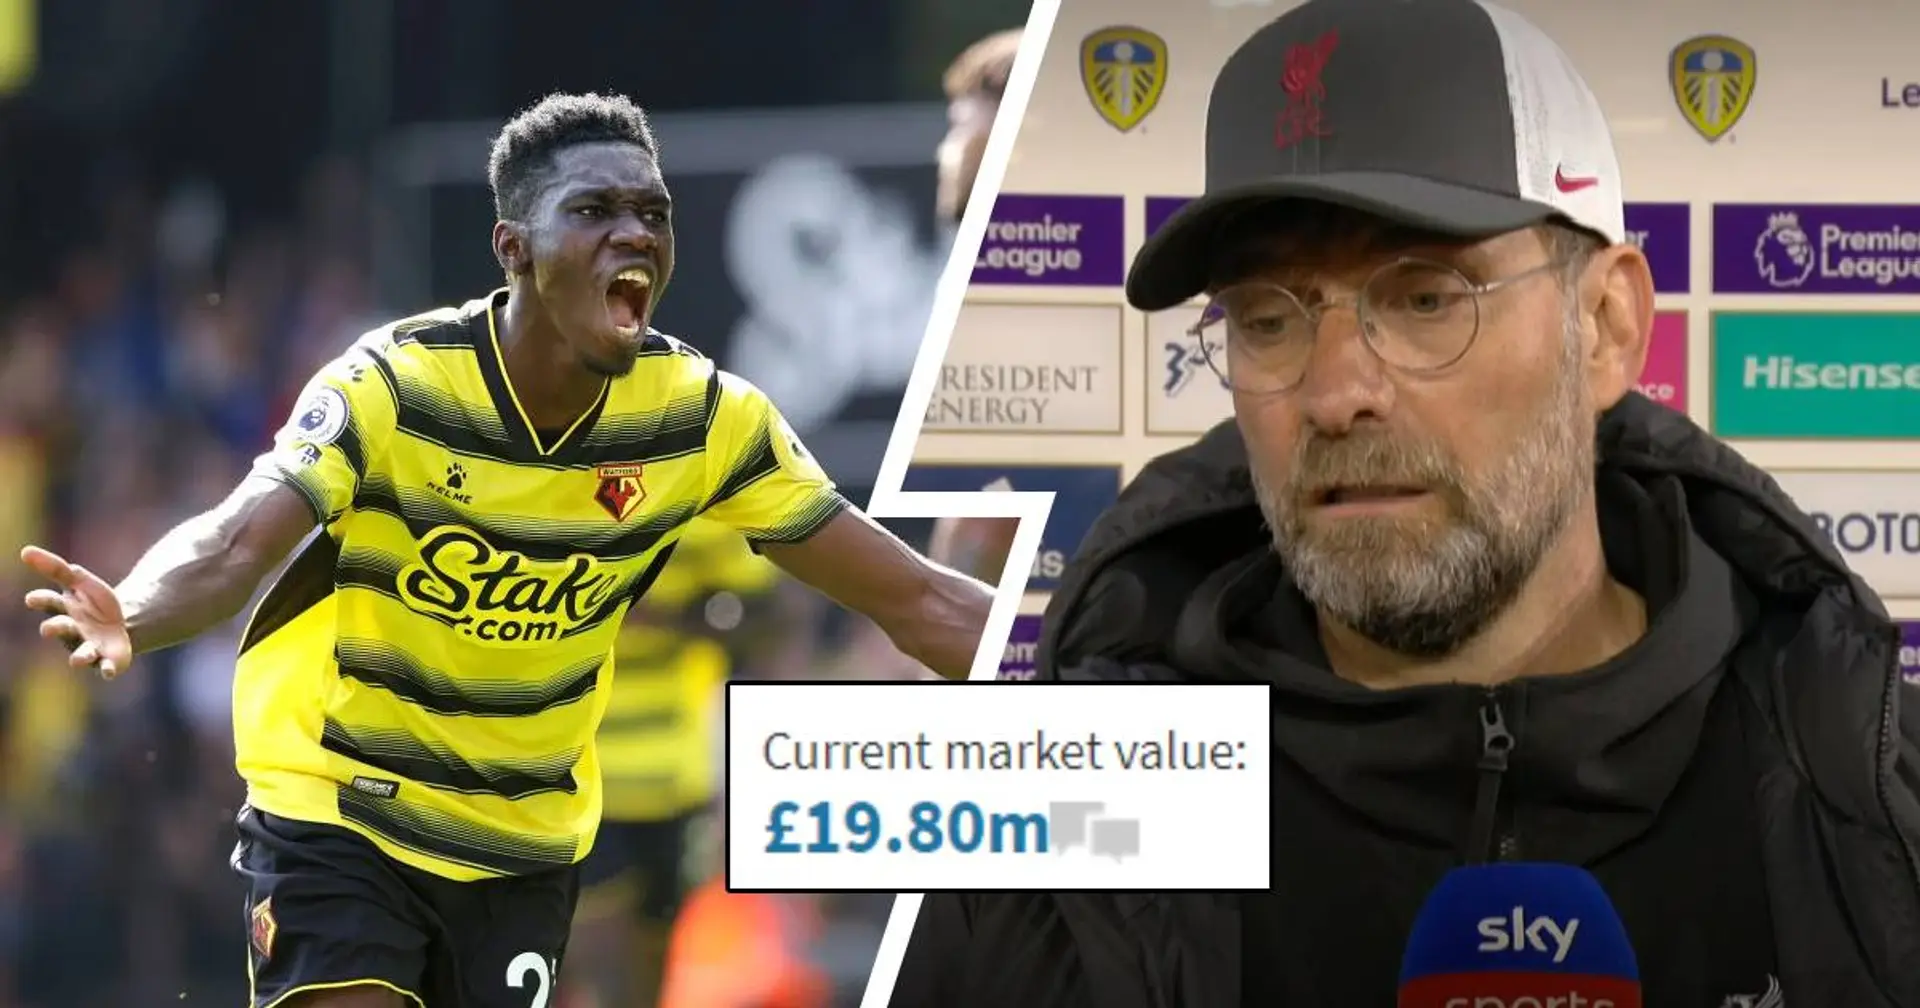 Ismaila Sarr on Liverpool's shortlist but Watford have no intention to sell (reliability: 4 stars)